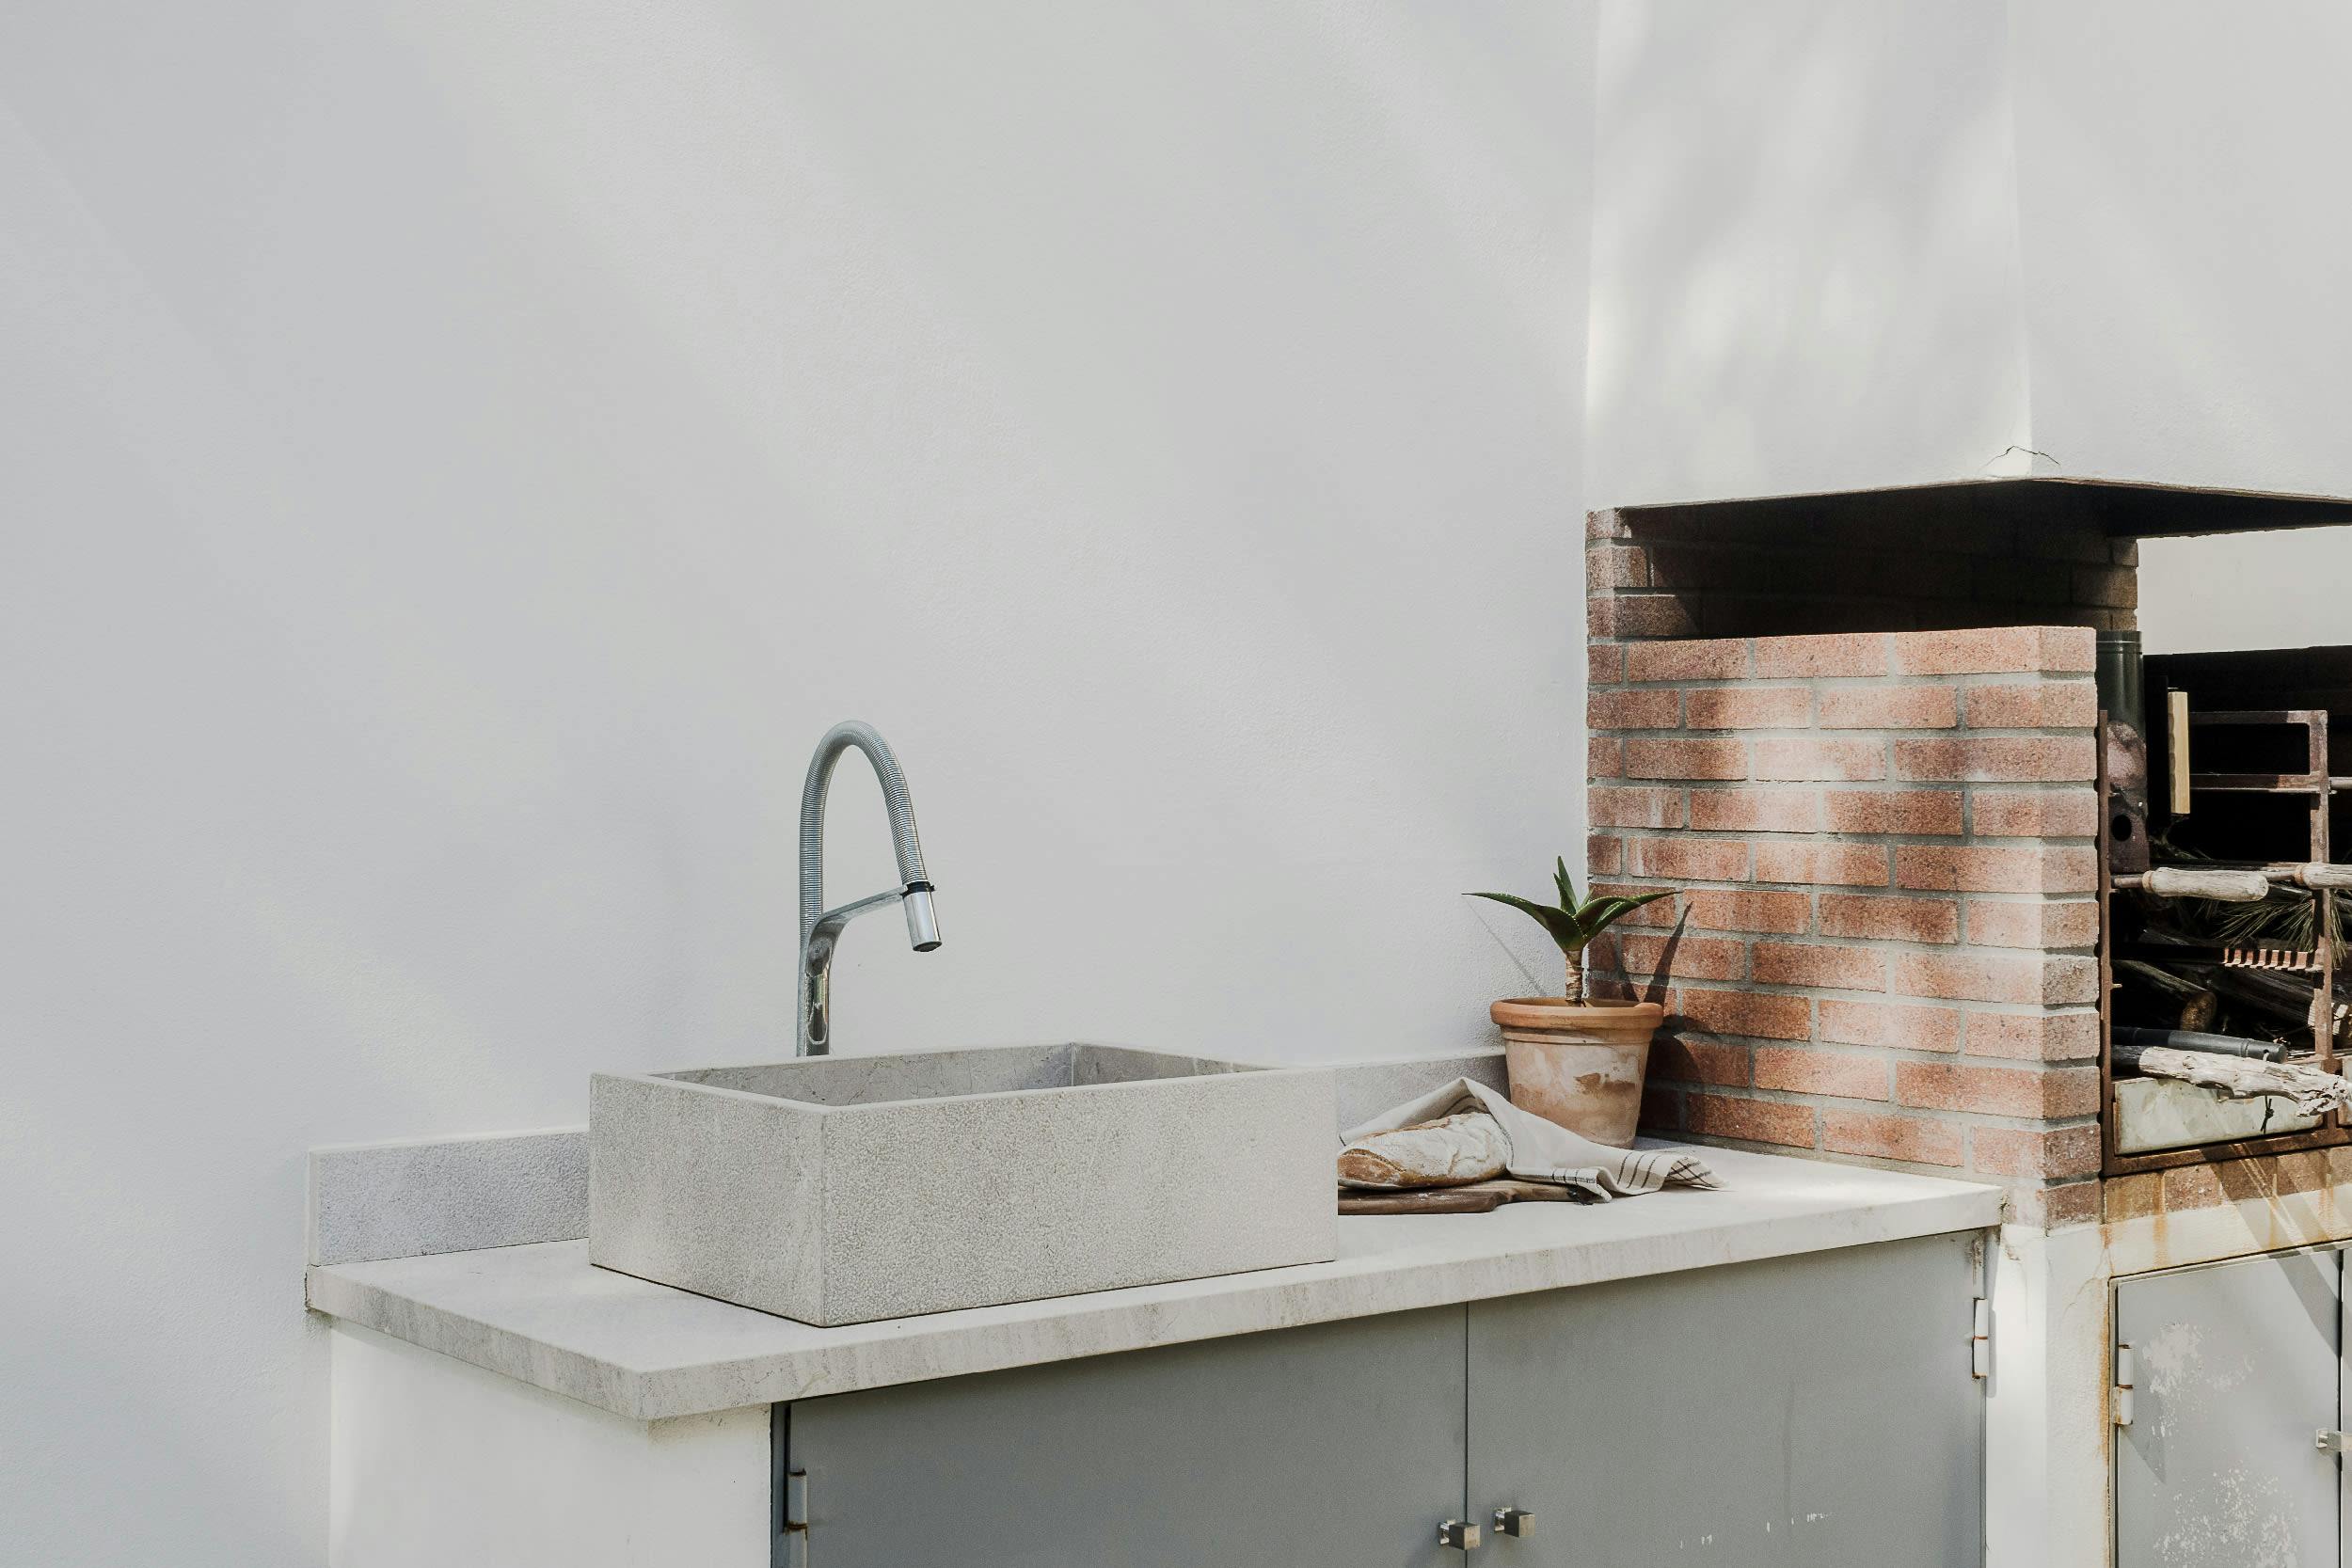 The image features a modern kitchen with a large sink, a stainless steel sink, and a brick oven.